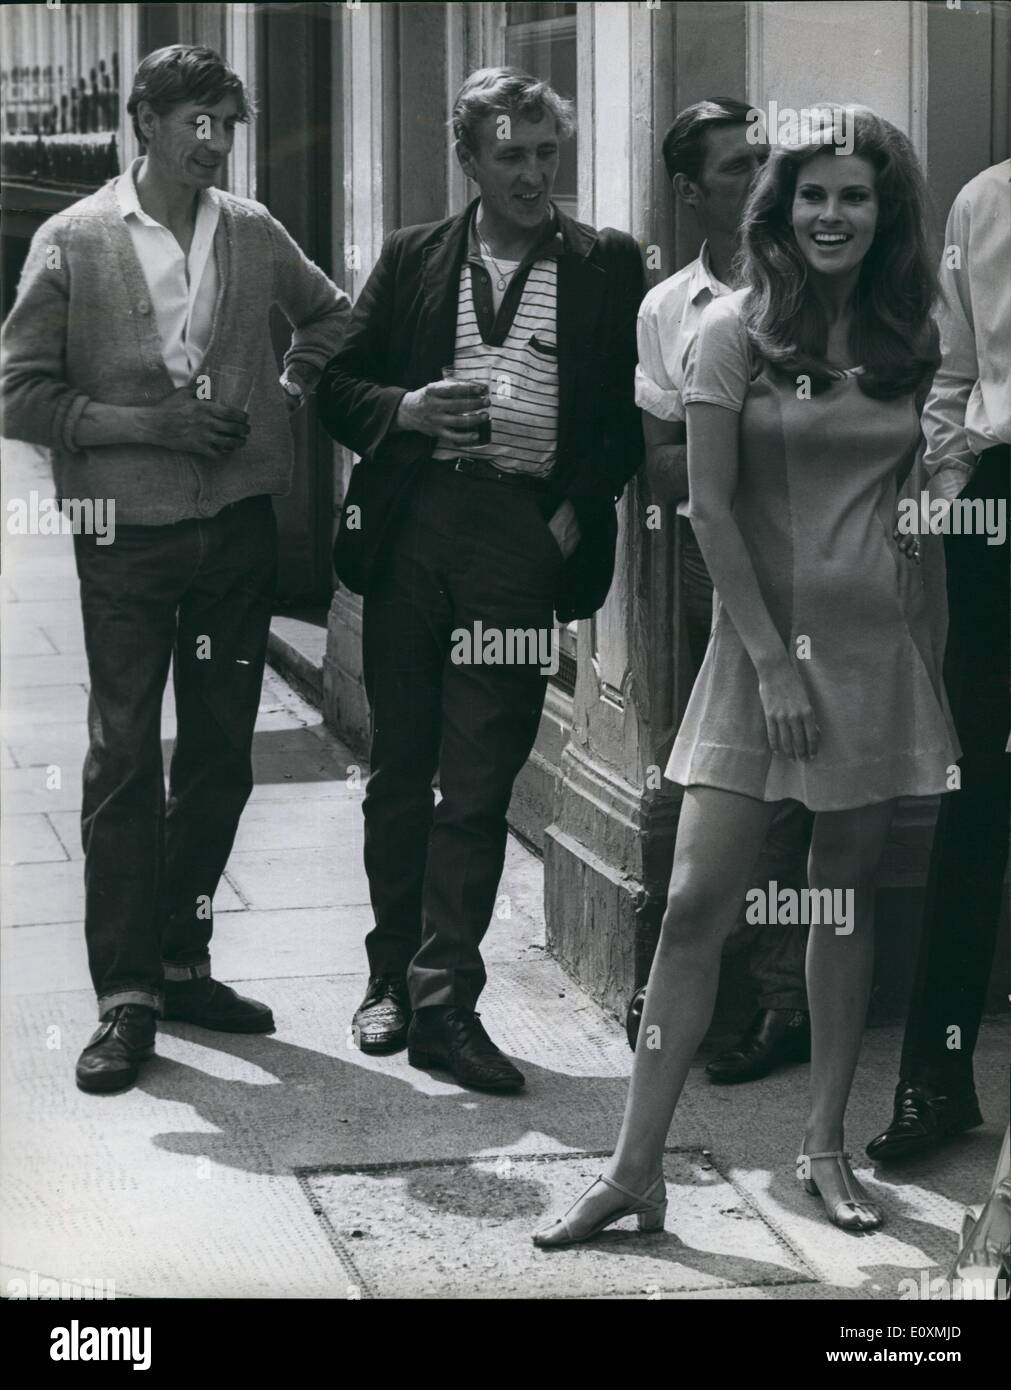 Jun. 06, 1967 - Raquel Welch On Location For ''Bedazzled'': Photo shows Actress Raquel Welch pictured in Fulham yesterday, where she was on location for the film ''Bedazzled'', which she is making with Peter Cook and Dudley Moore. The man in the picture is not in the film - he just happened to be around. Stock Photo